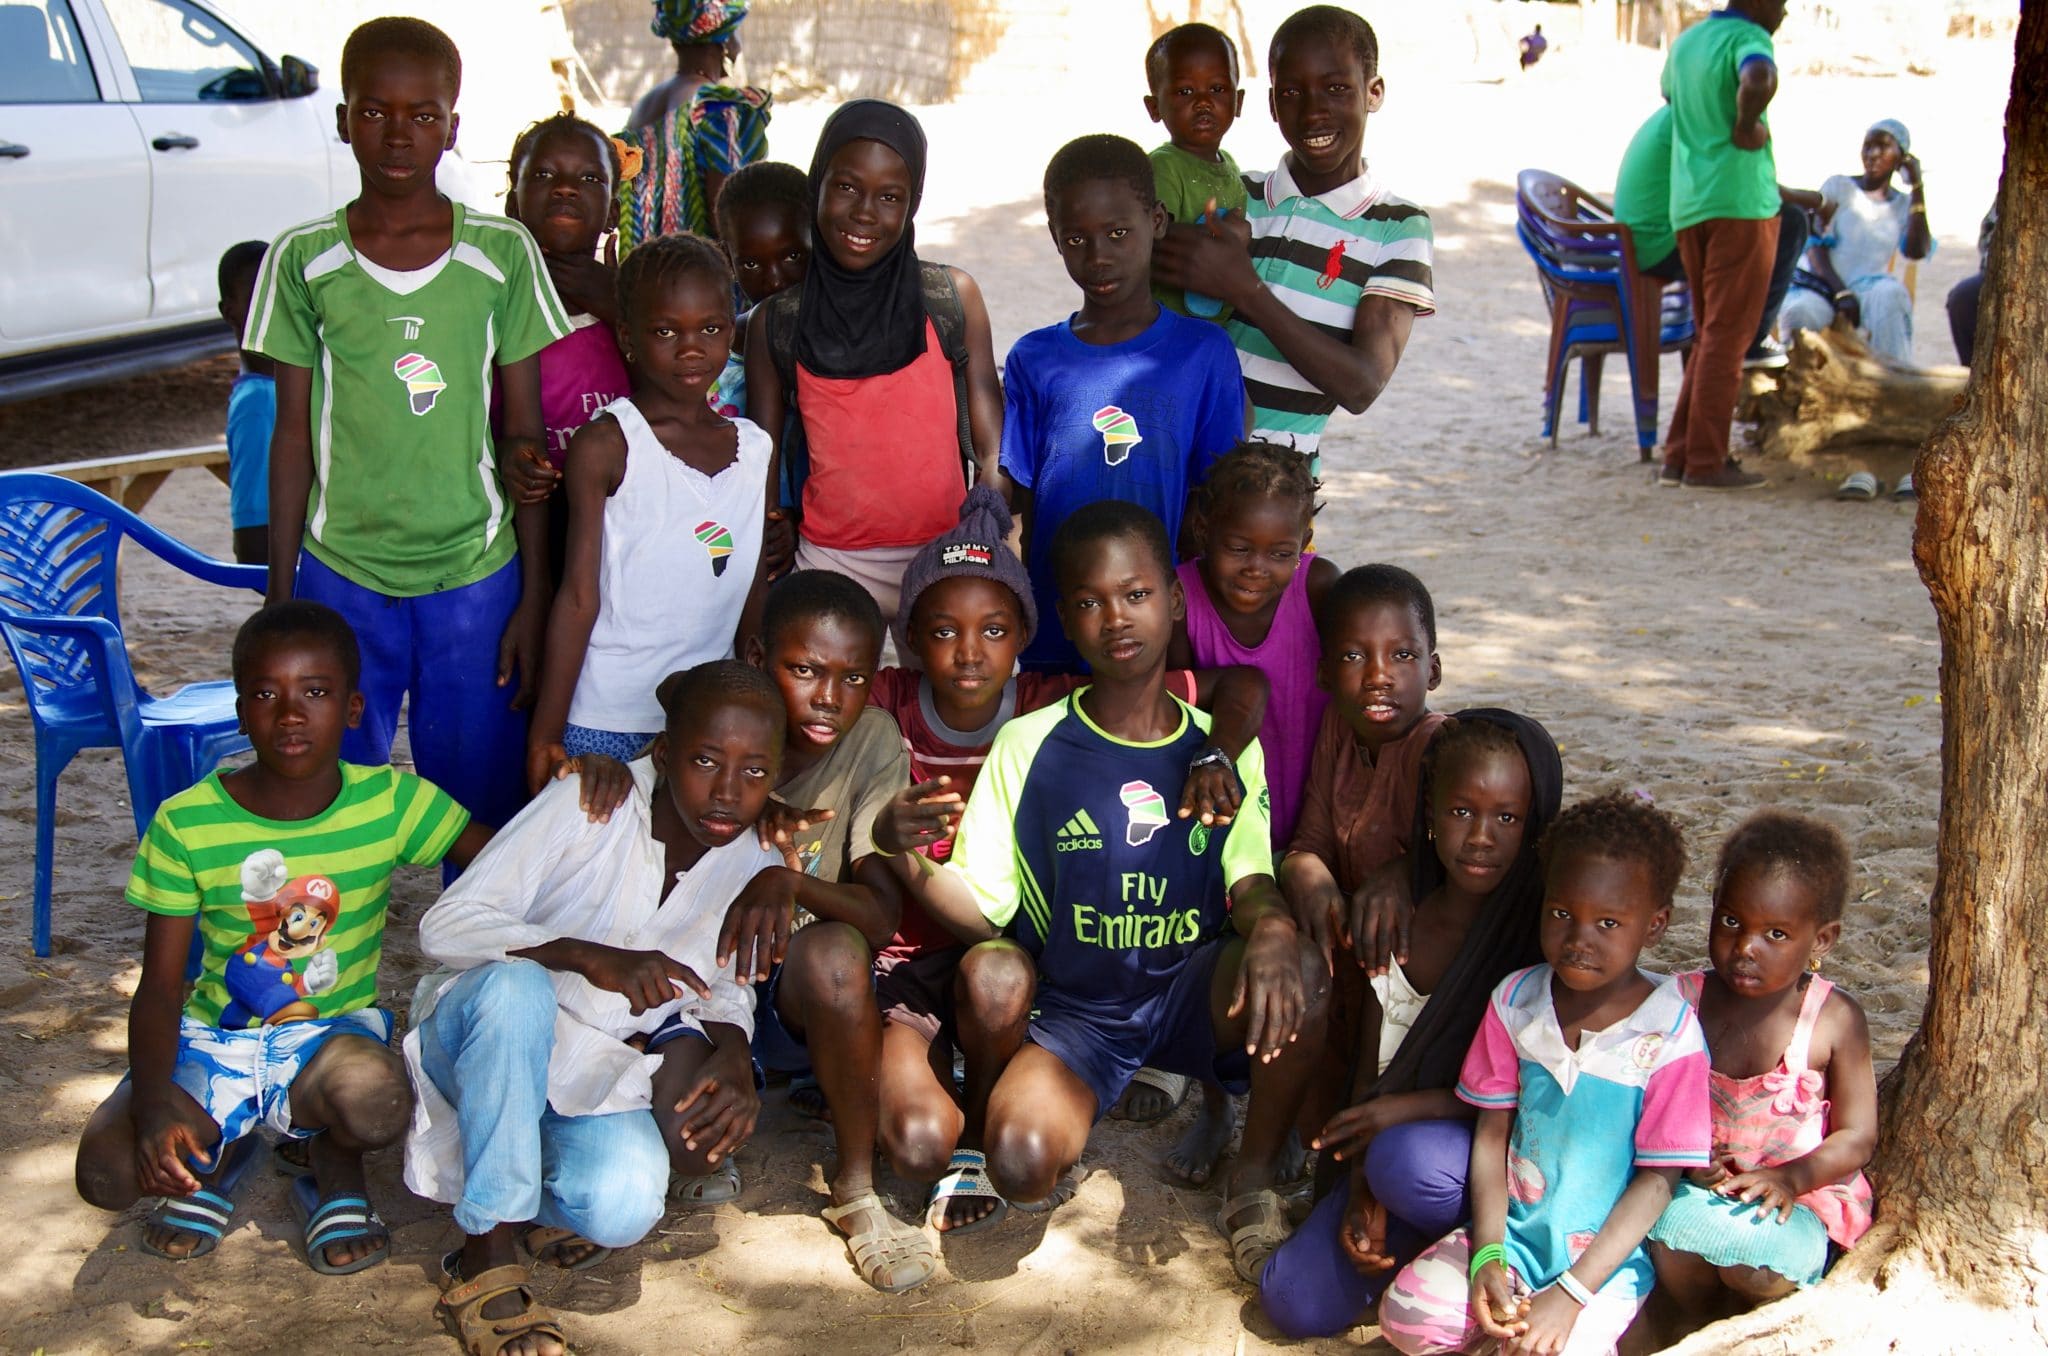 Group of youth in Senegal